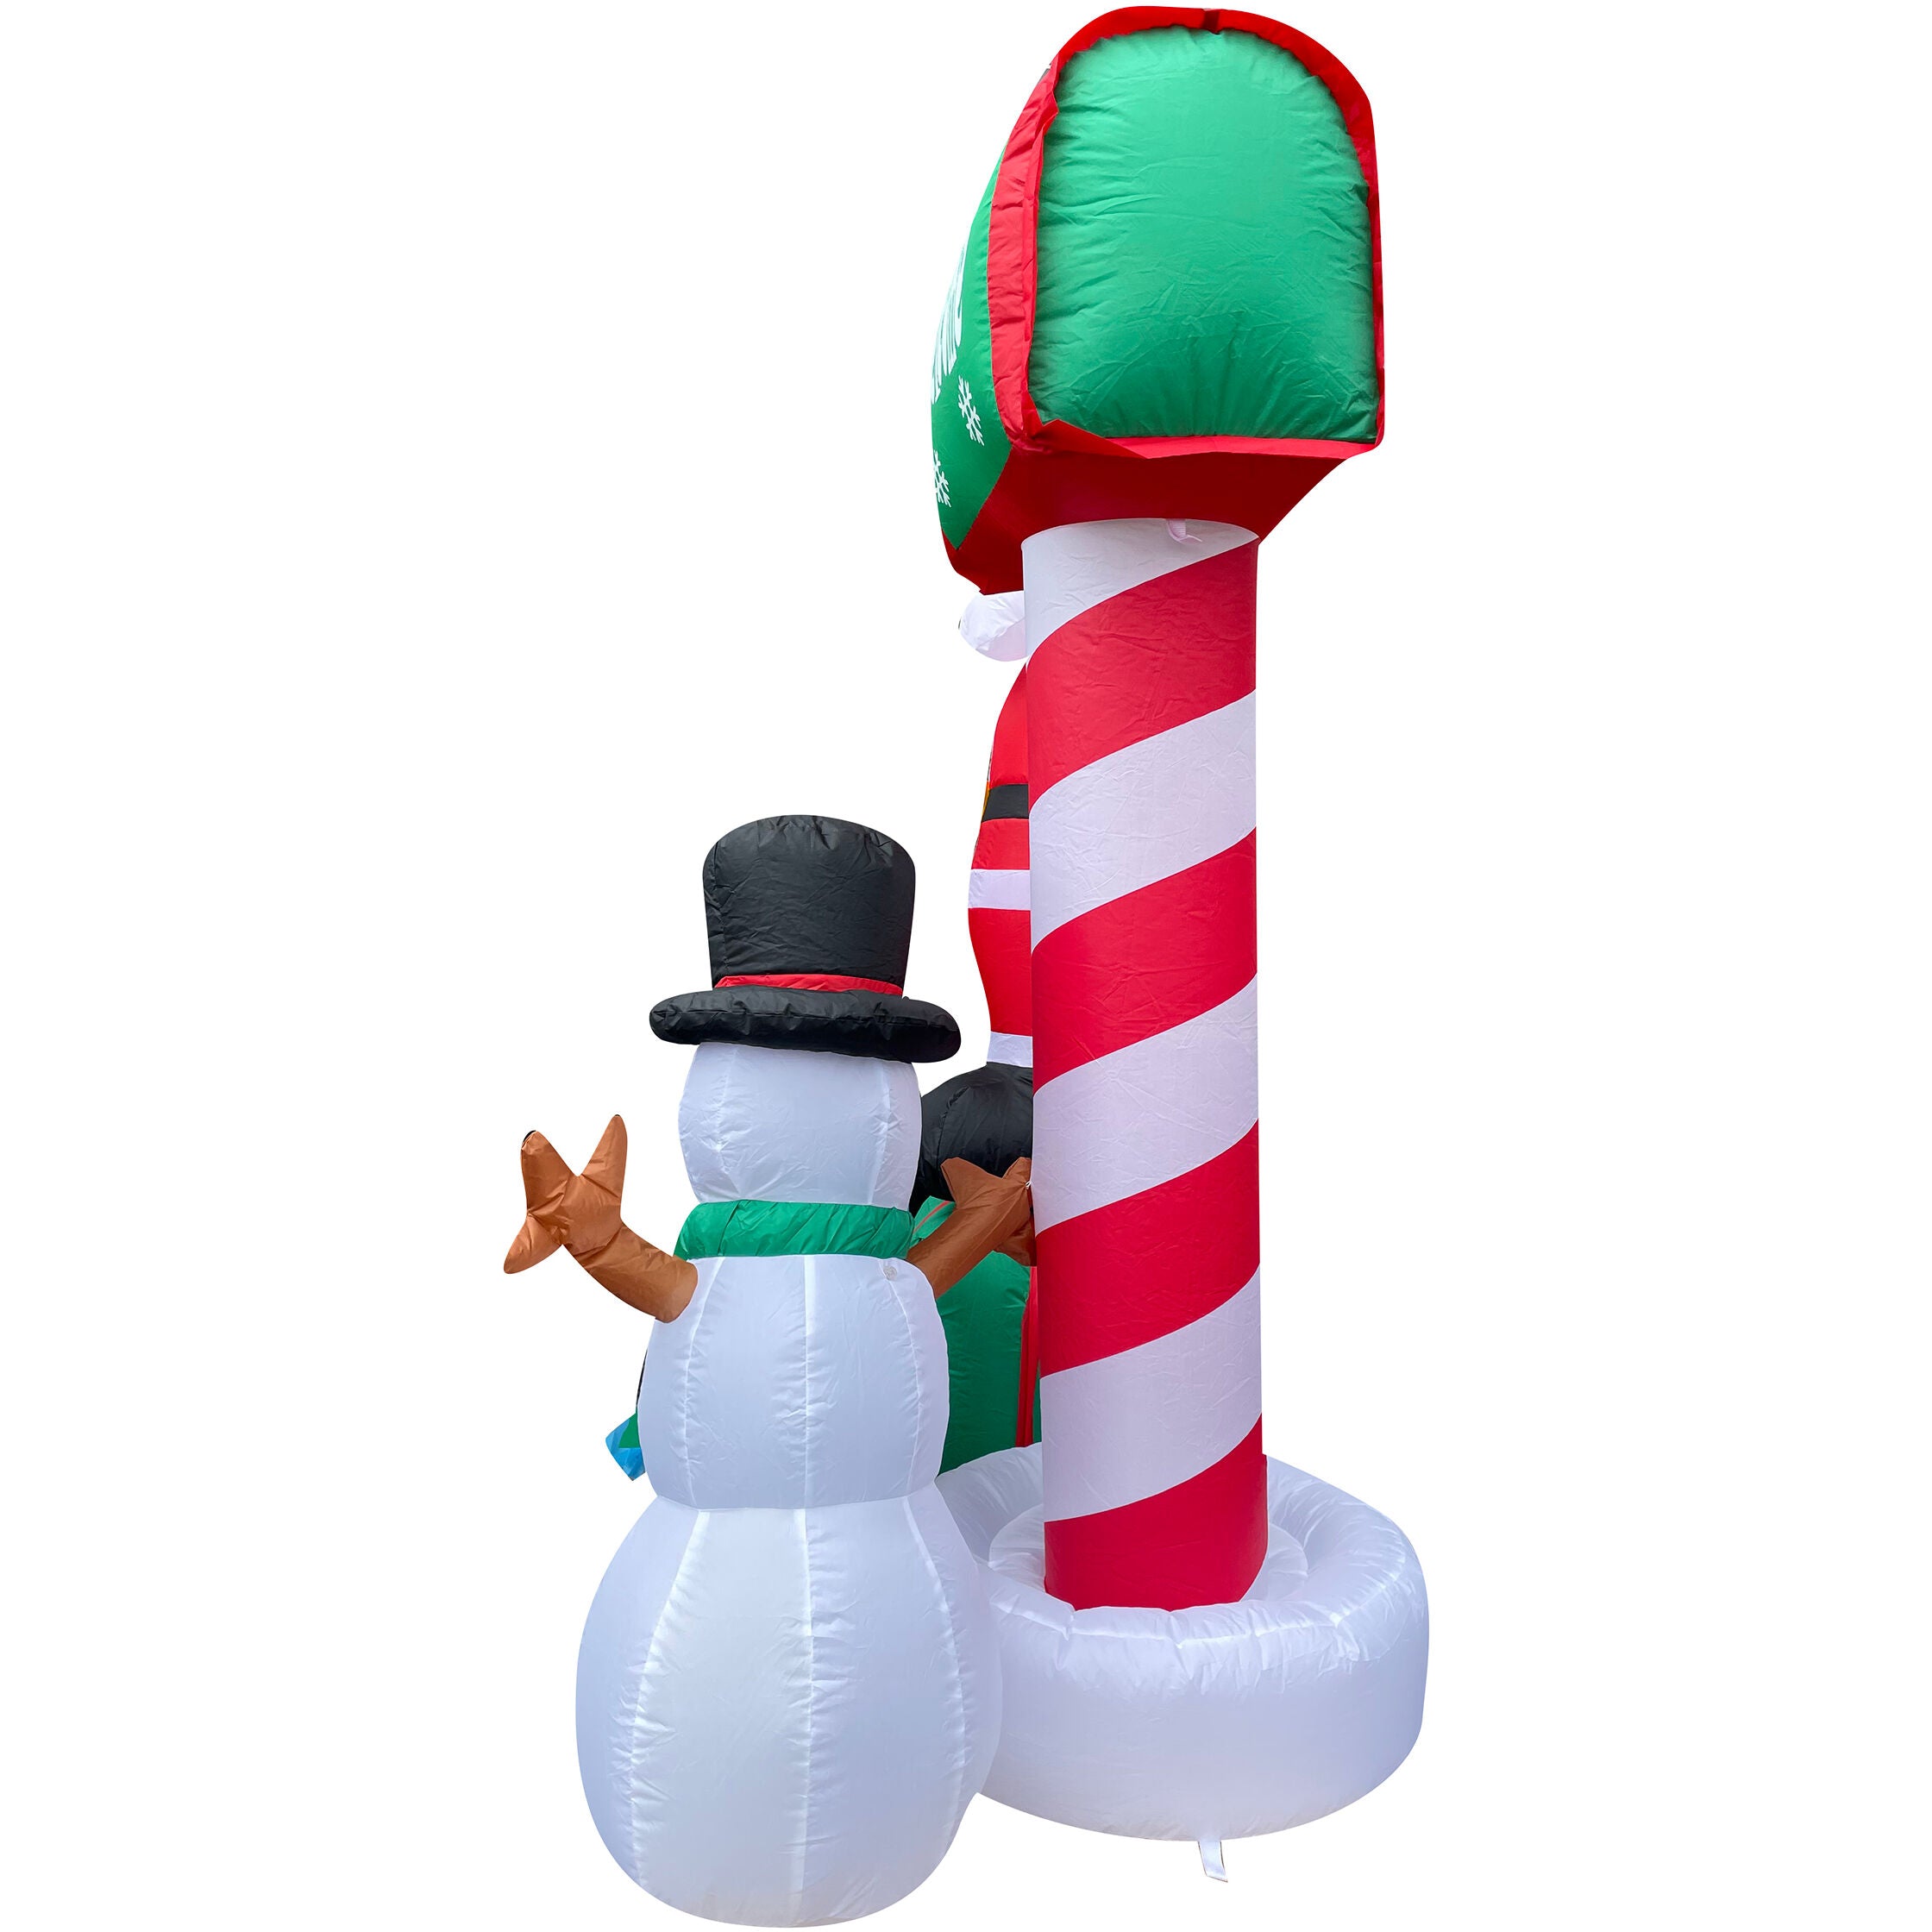 Fraser Hill Farm -  6-Ft. Tall Welcome Mailbox with Santa, Snowman, and Penguin, Outdoor Blow-Up Christmas Inflatable with Lights and Storage Bag